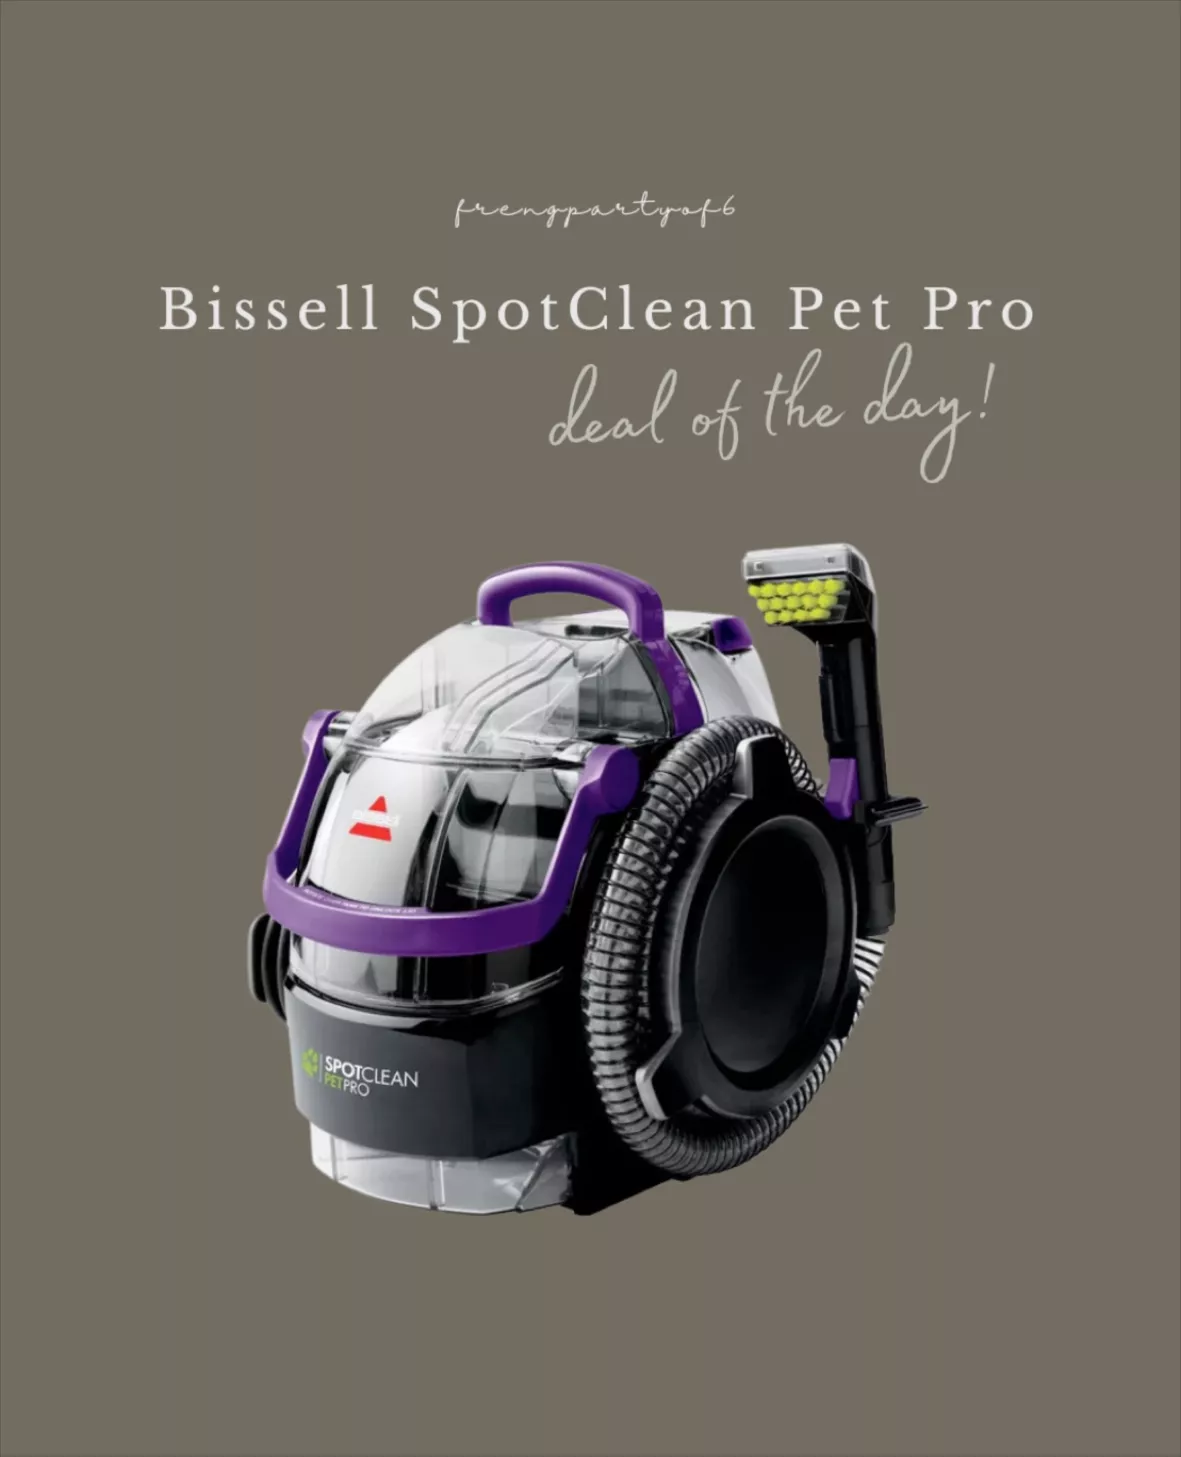 How to Use the Bissell Spotclean Pet Pro Portable Carpet Cleaner 